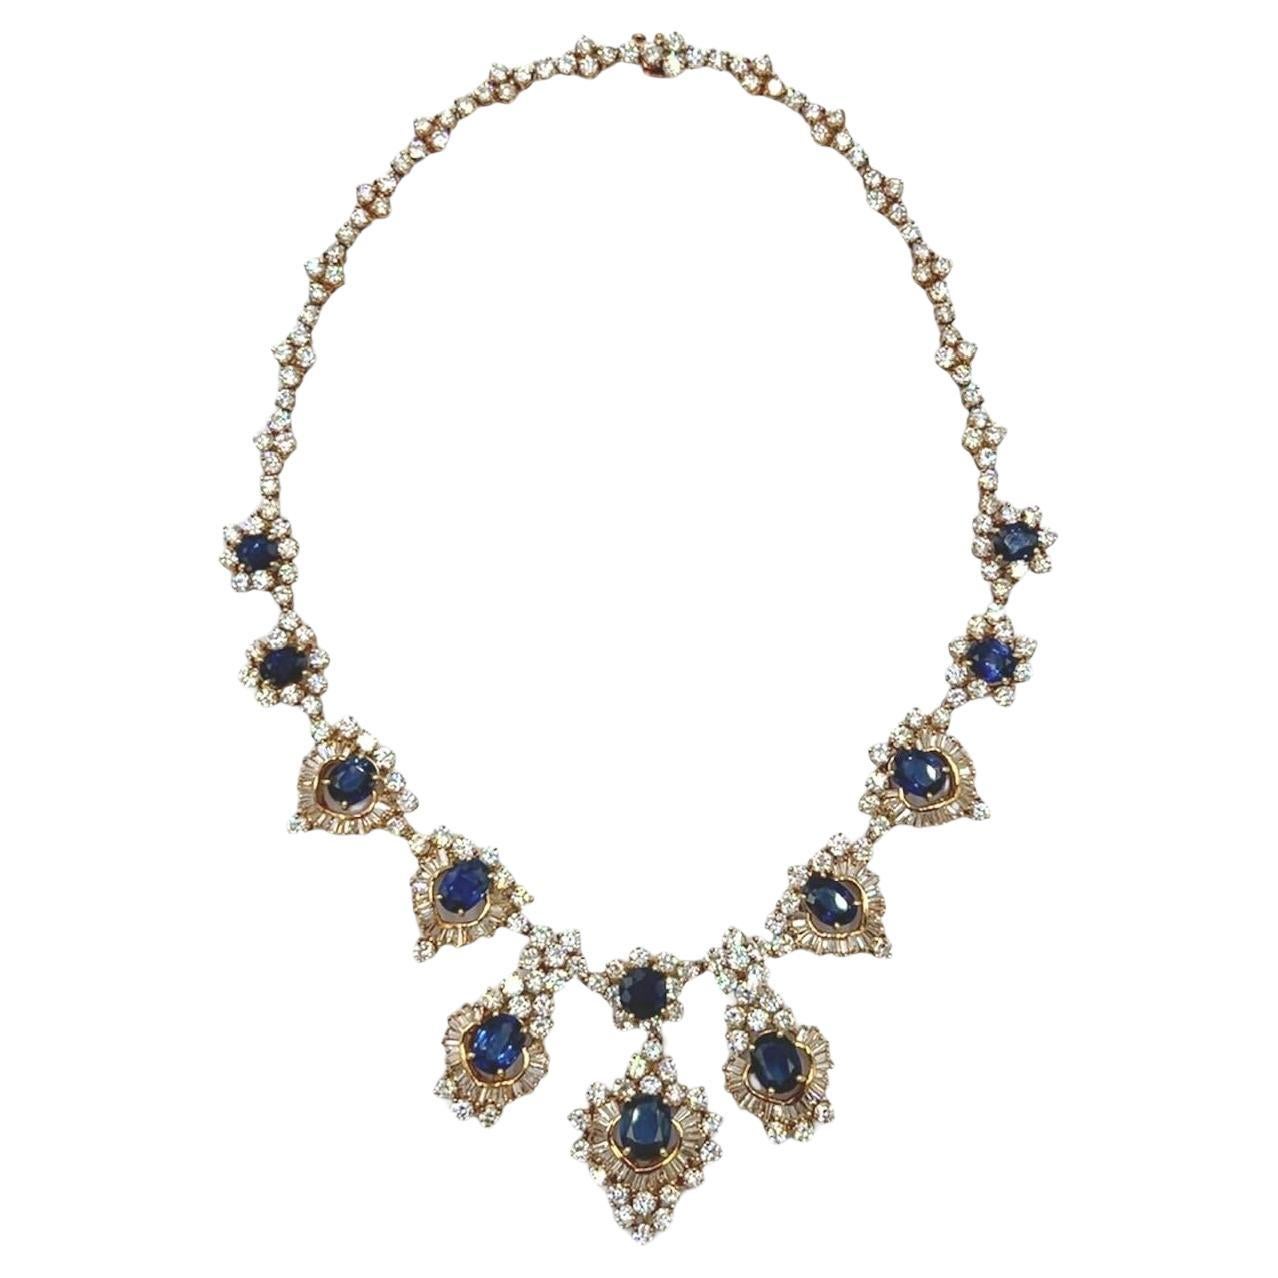 A Yellow Gold, Sapphire and Diamond Necklace